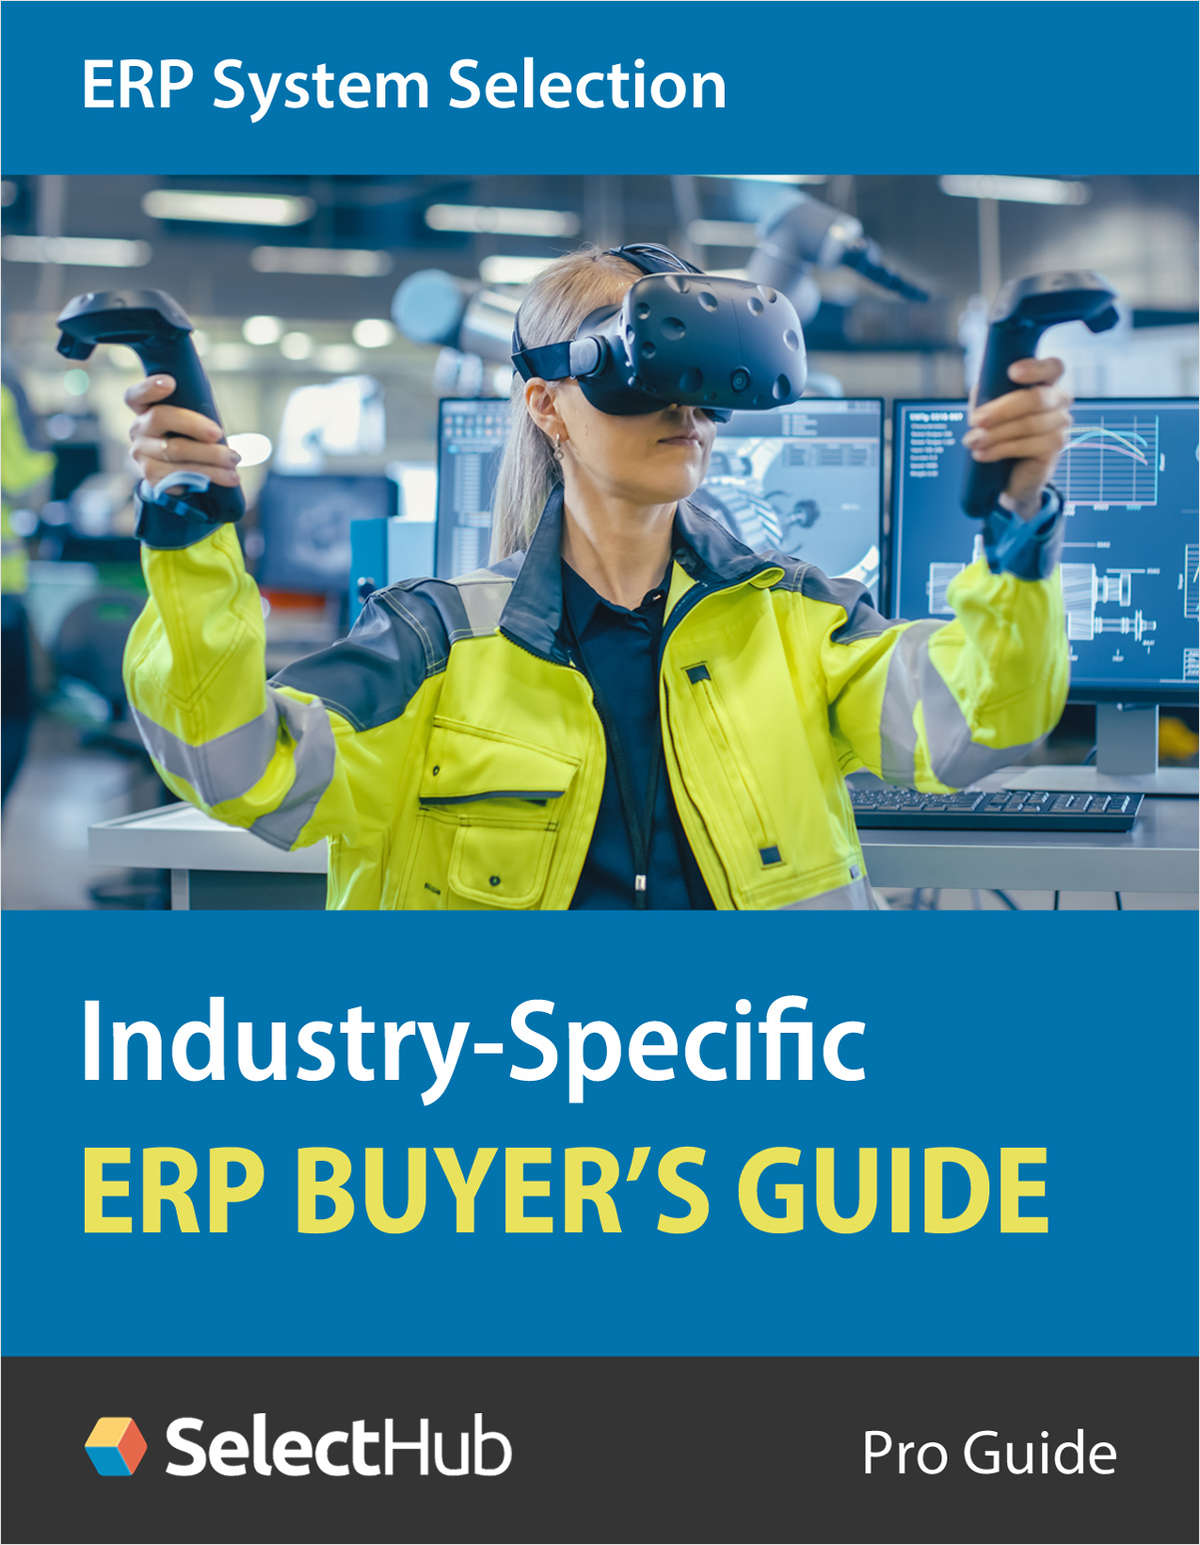 IndustrySpecific ERP Software Buyer's Guide 2021 Free Guide